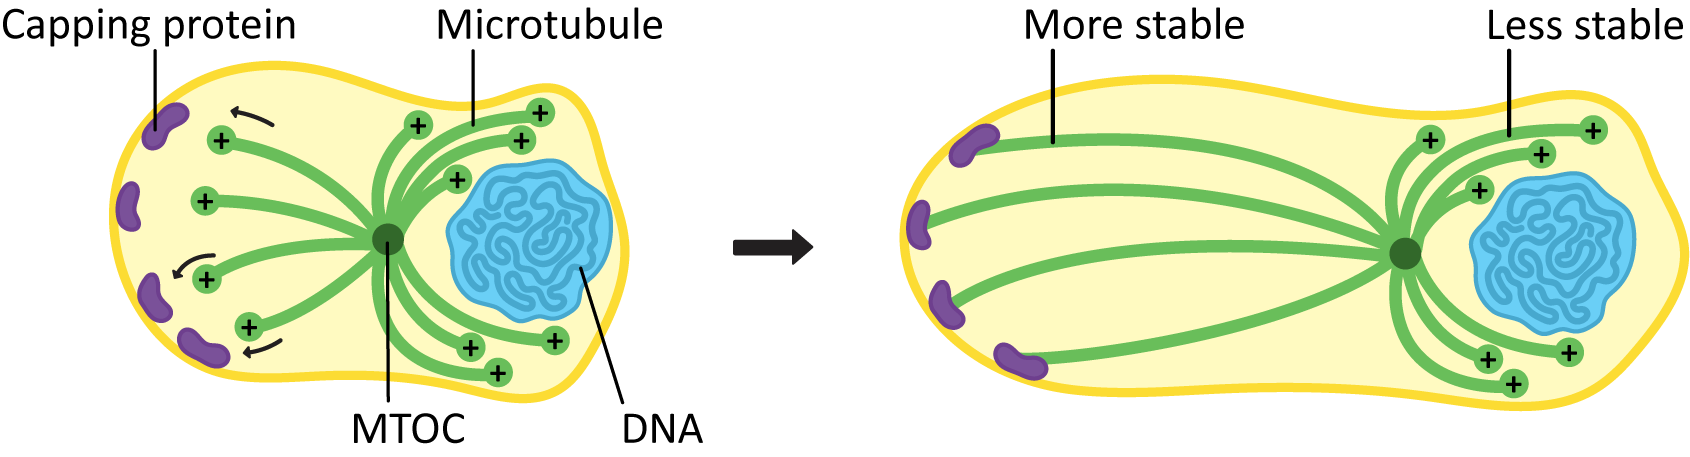 Microtubules protrude and influence cell shape